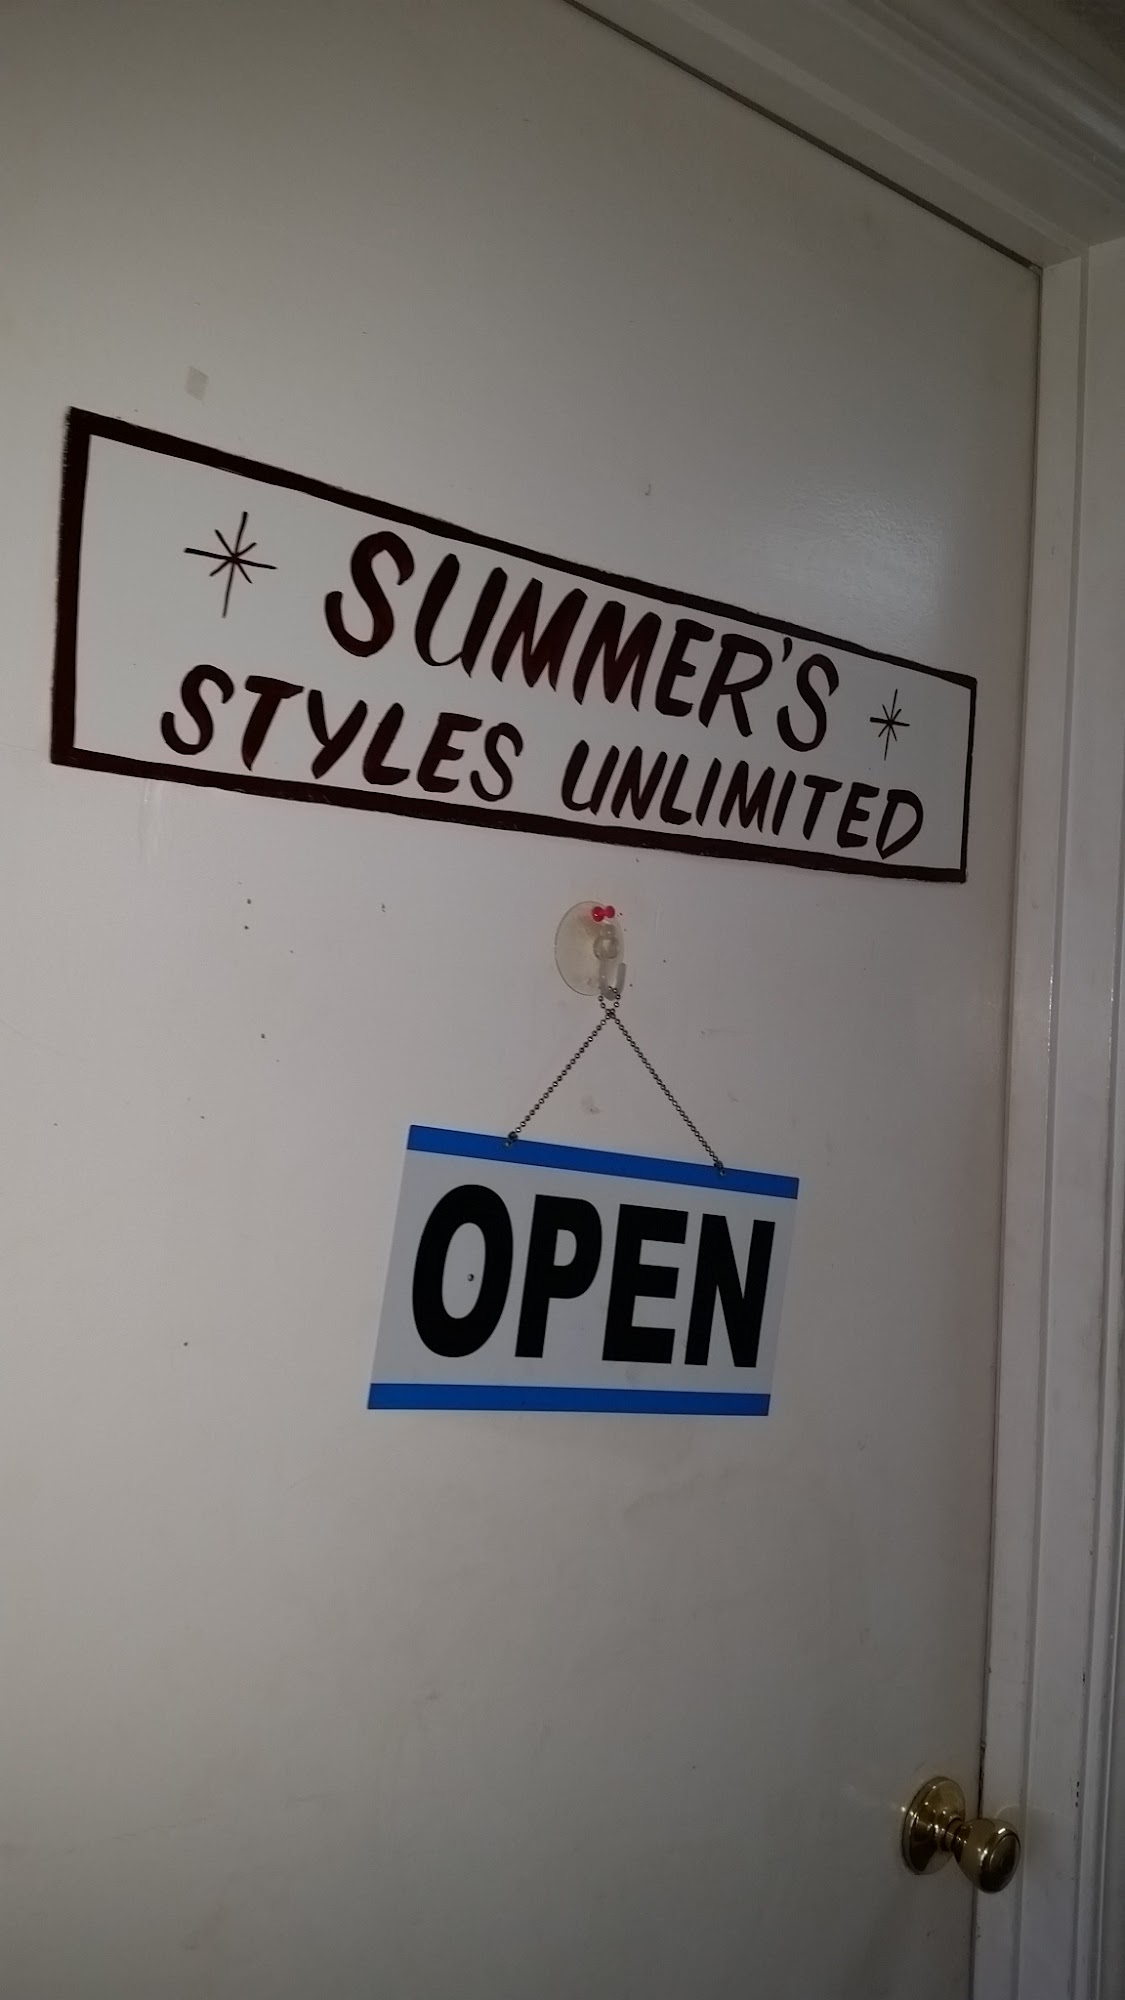 Summer's Styles Unlimited